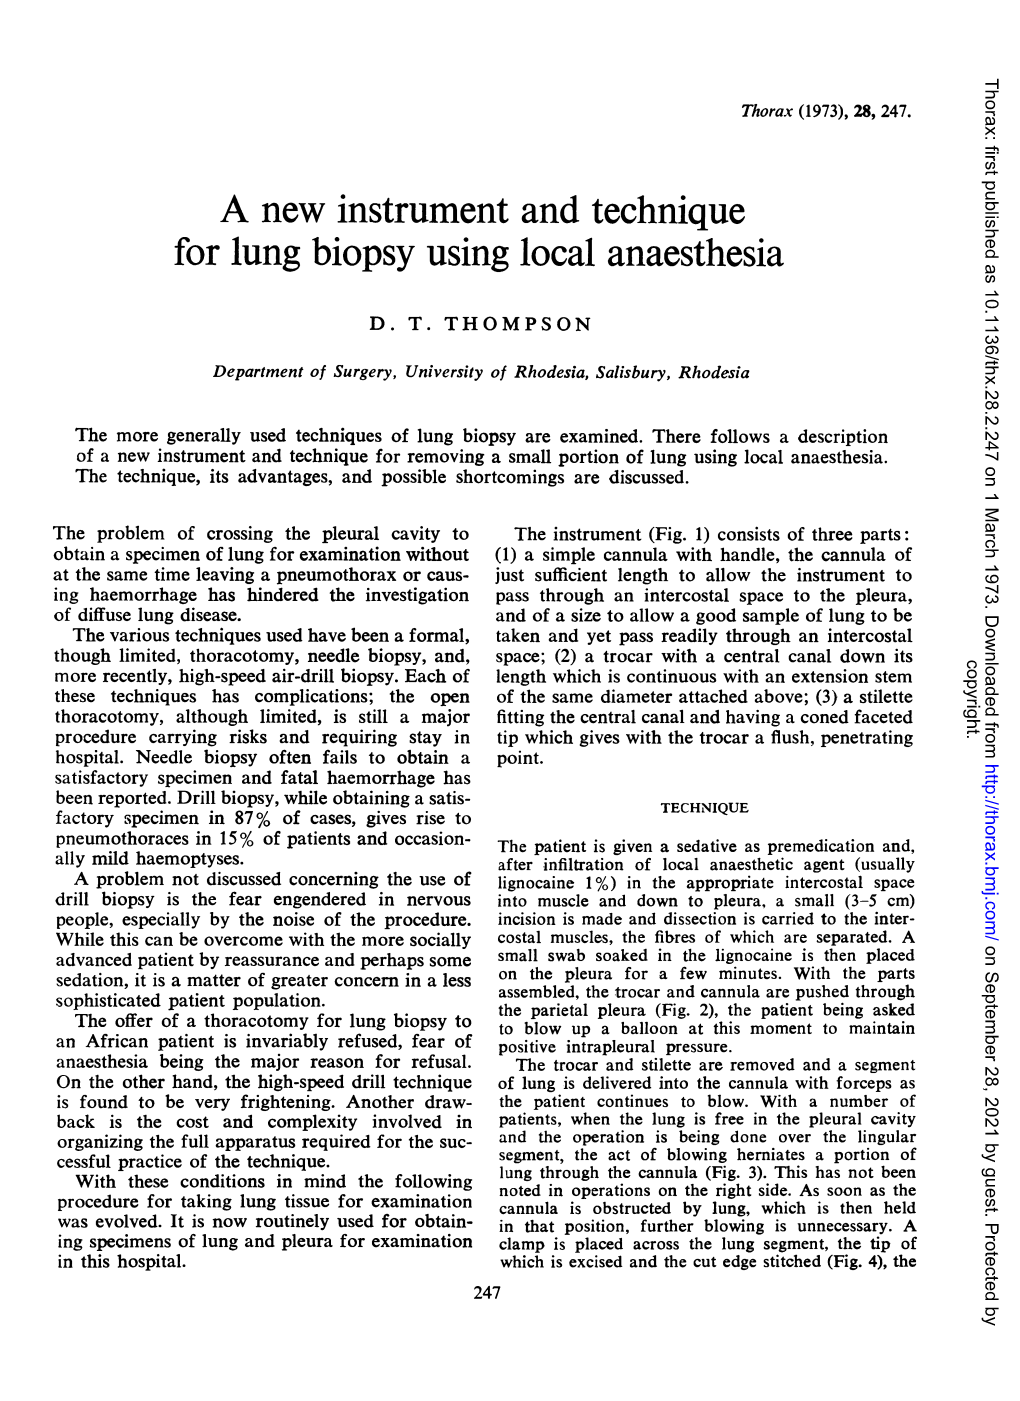 A New Instrument and Technique for Lung Biopsy Using Local Anaesthesia